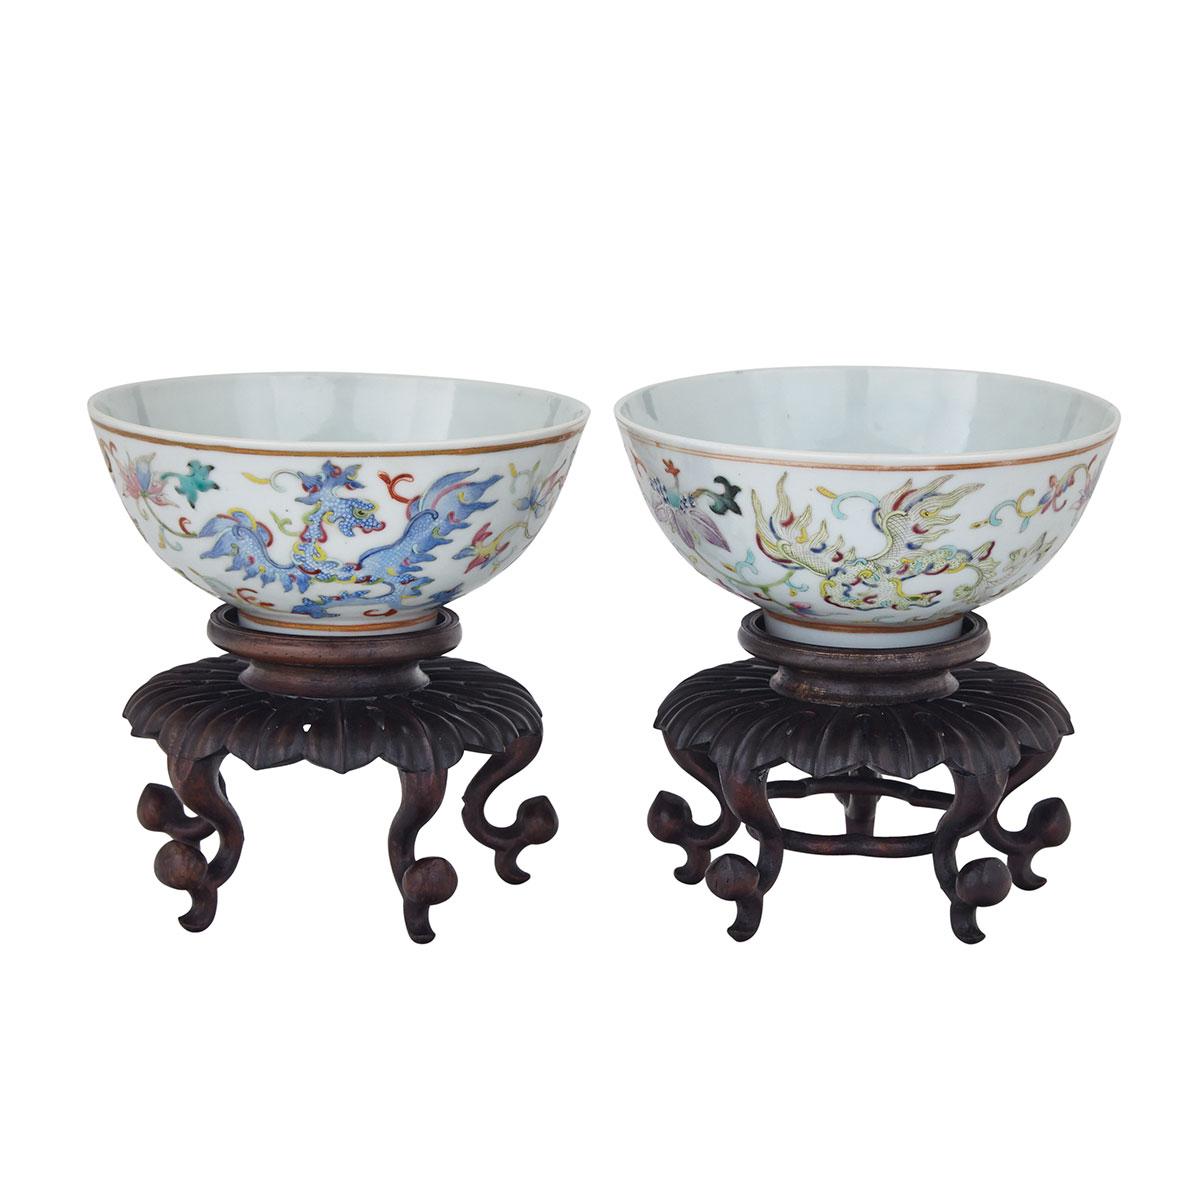 Pair of Famille Rose Phoenix Bowls, Guangxu Mark and Period (1875-1908)